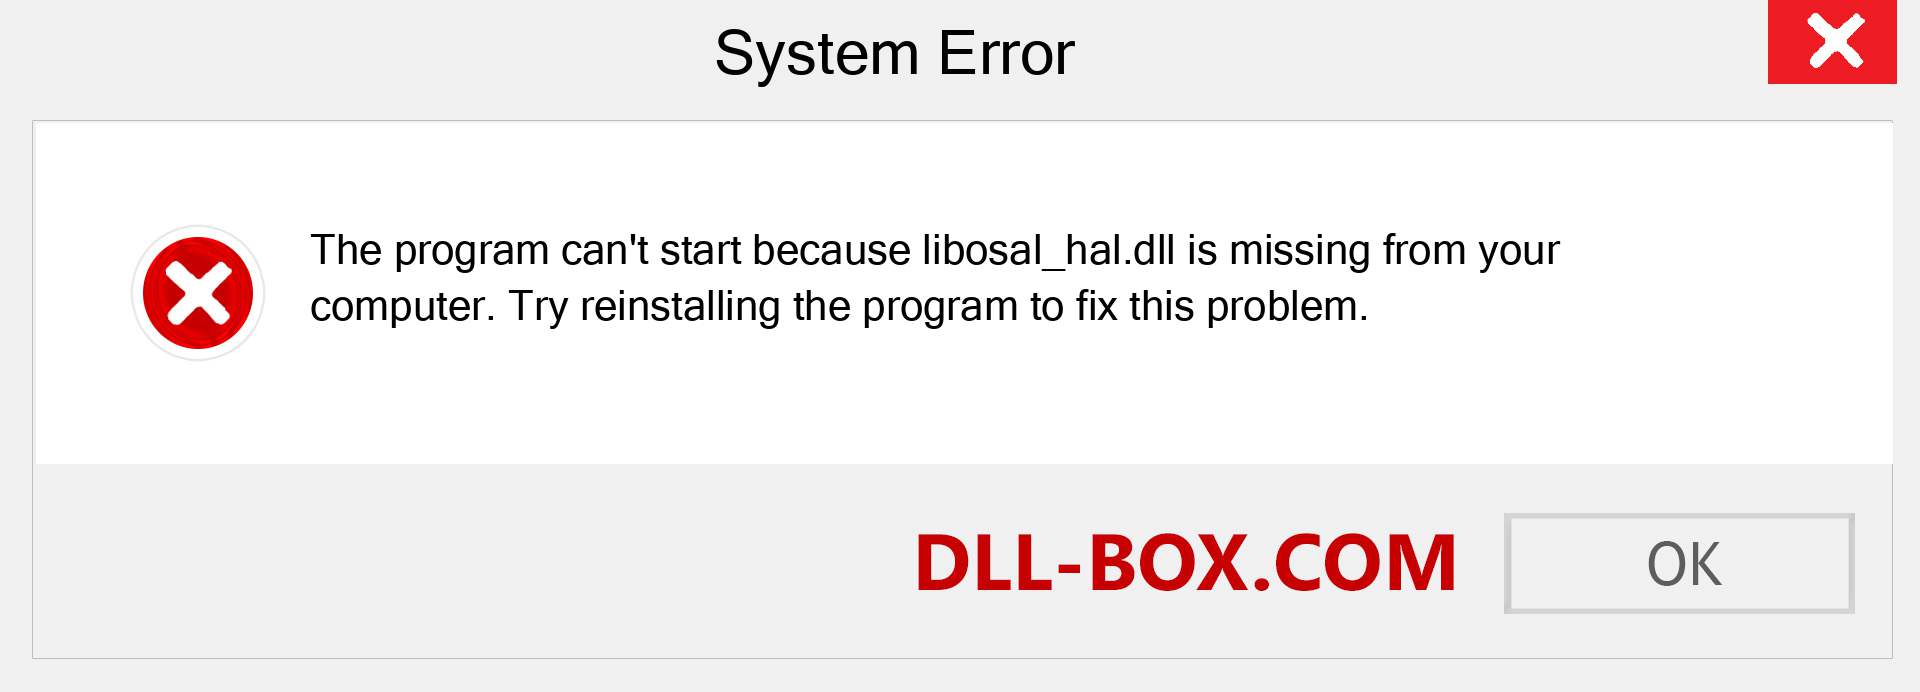  libosal_hal.dll file is missing?. Download for Windows 7, 8, 10 - Fix  libosal_hal dll Missing Error on Windows, photos, images